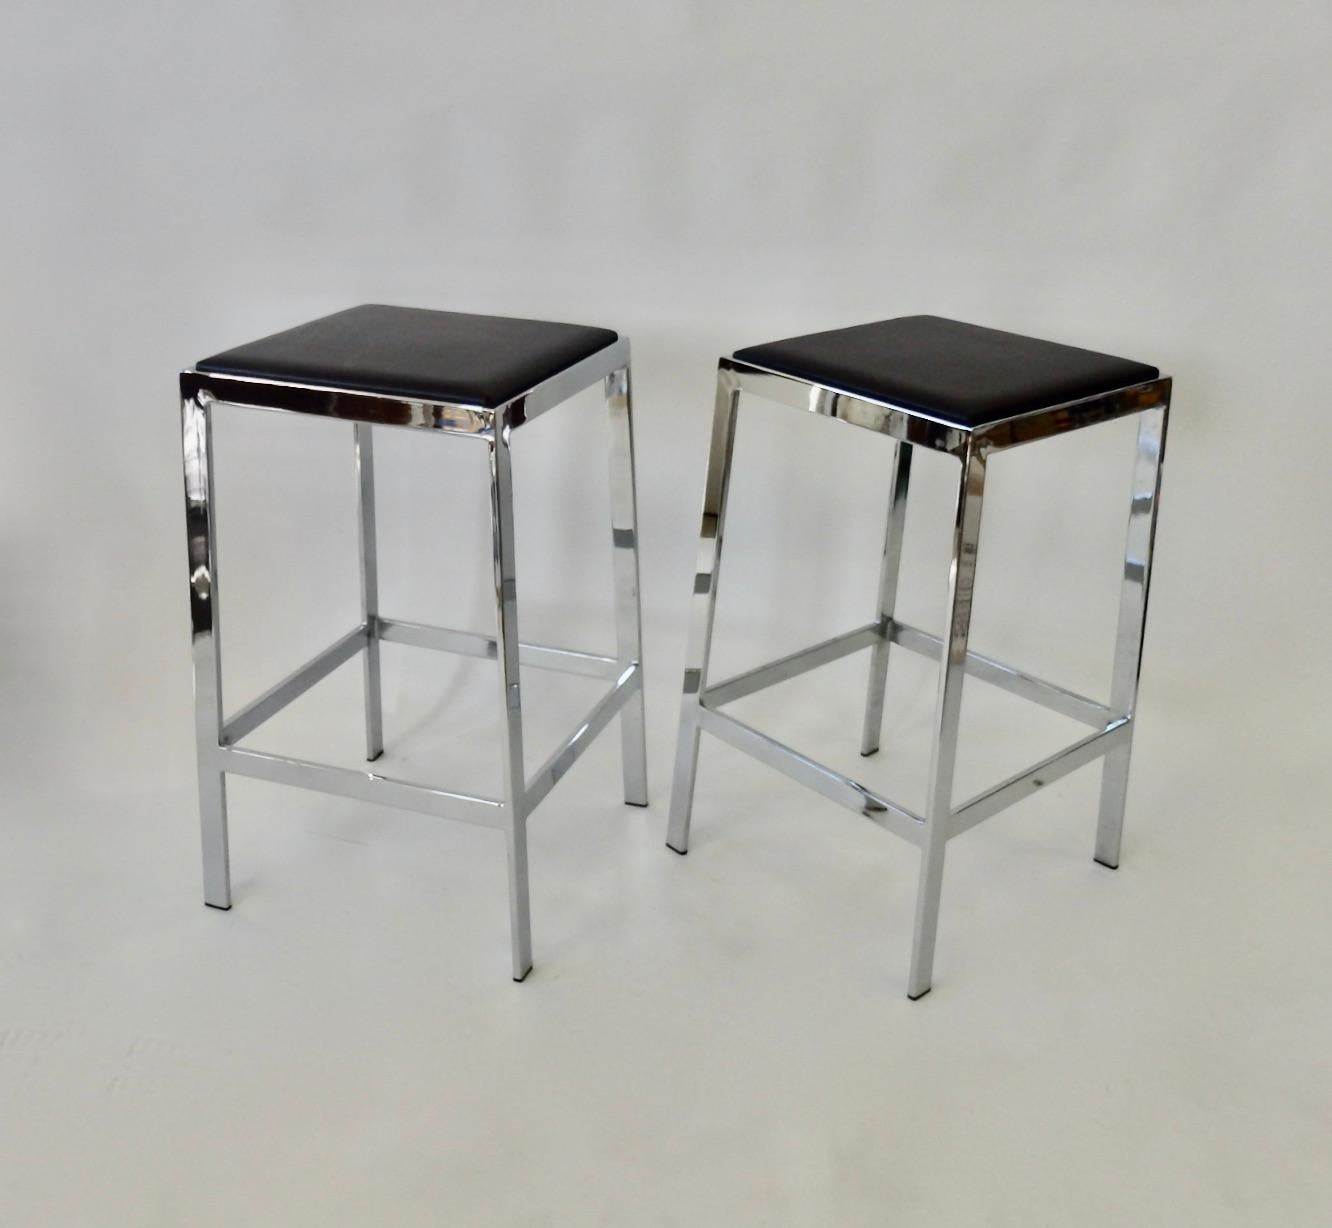 Pair of well-designed modernist bar or counter stools.